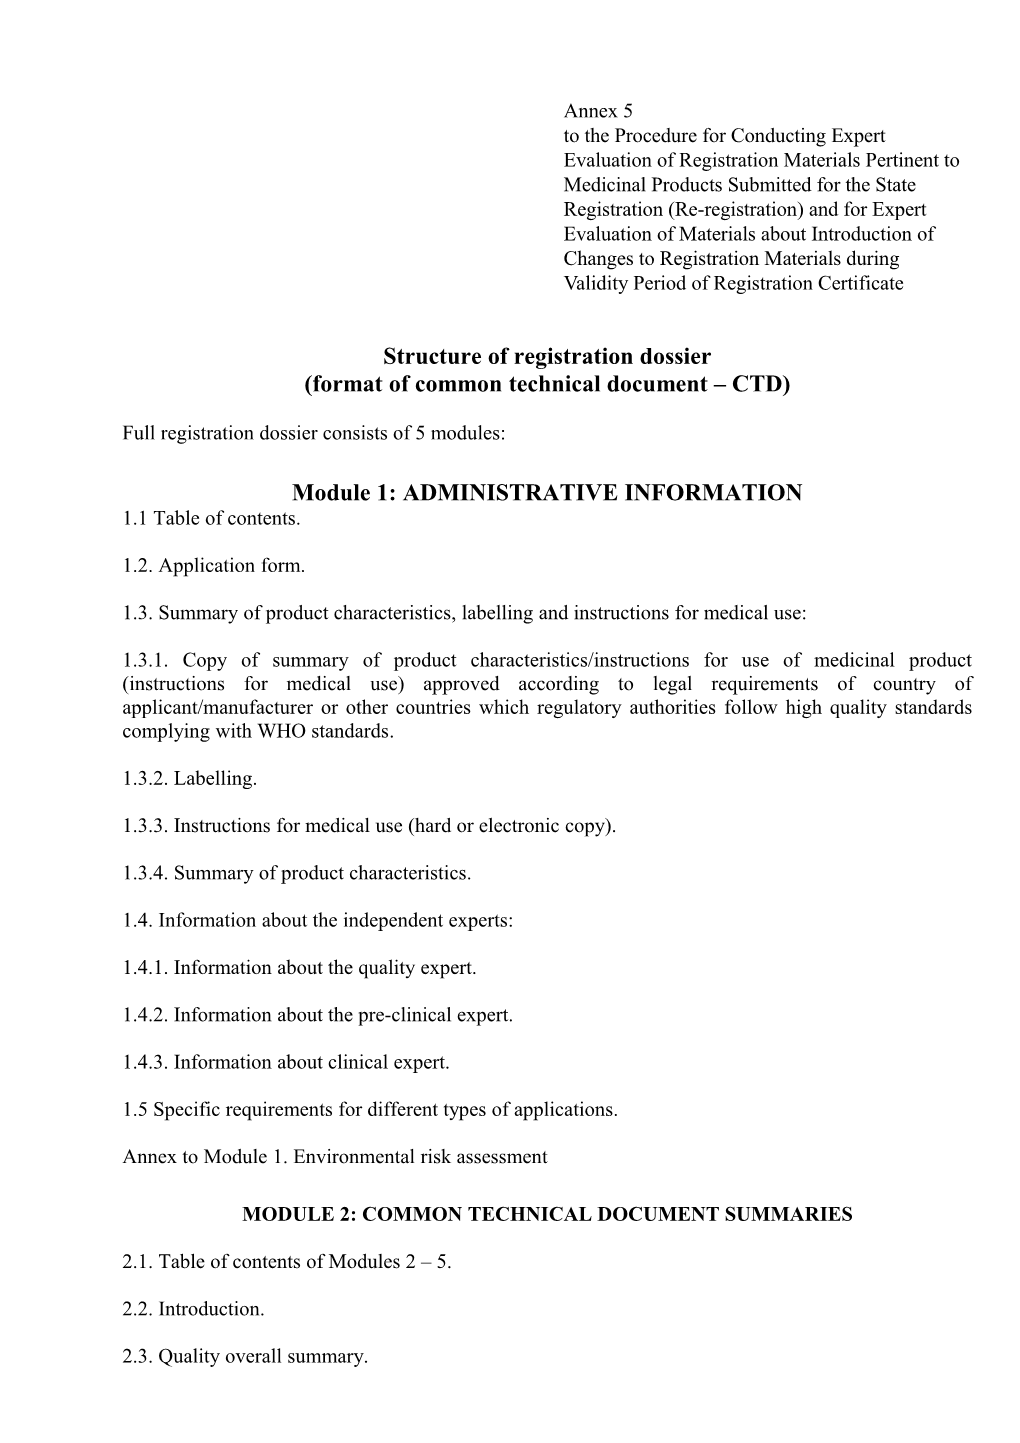 Format of Common Technical Document CTD